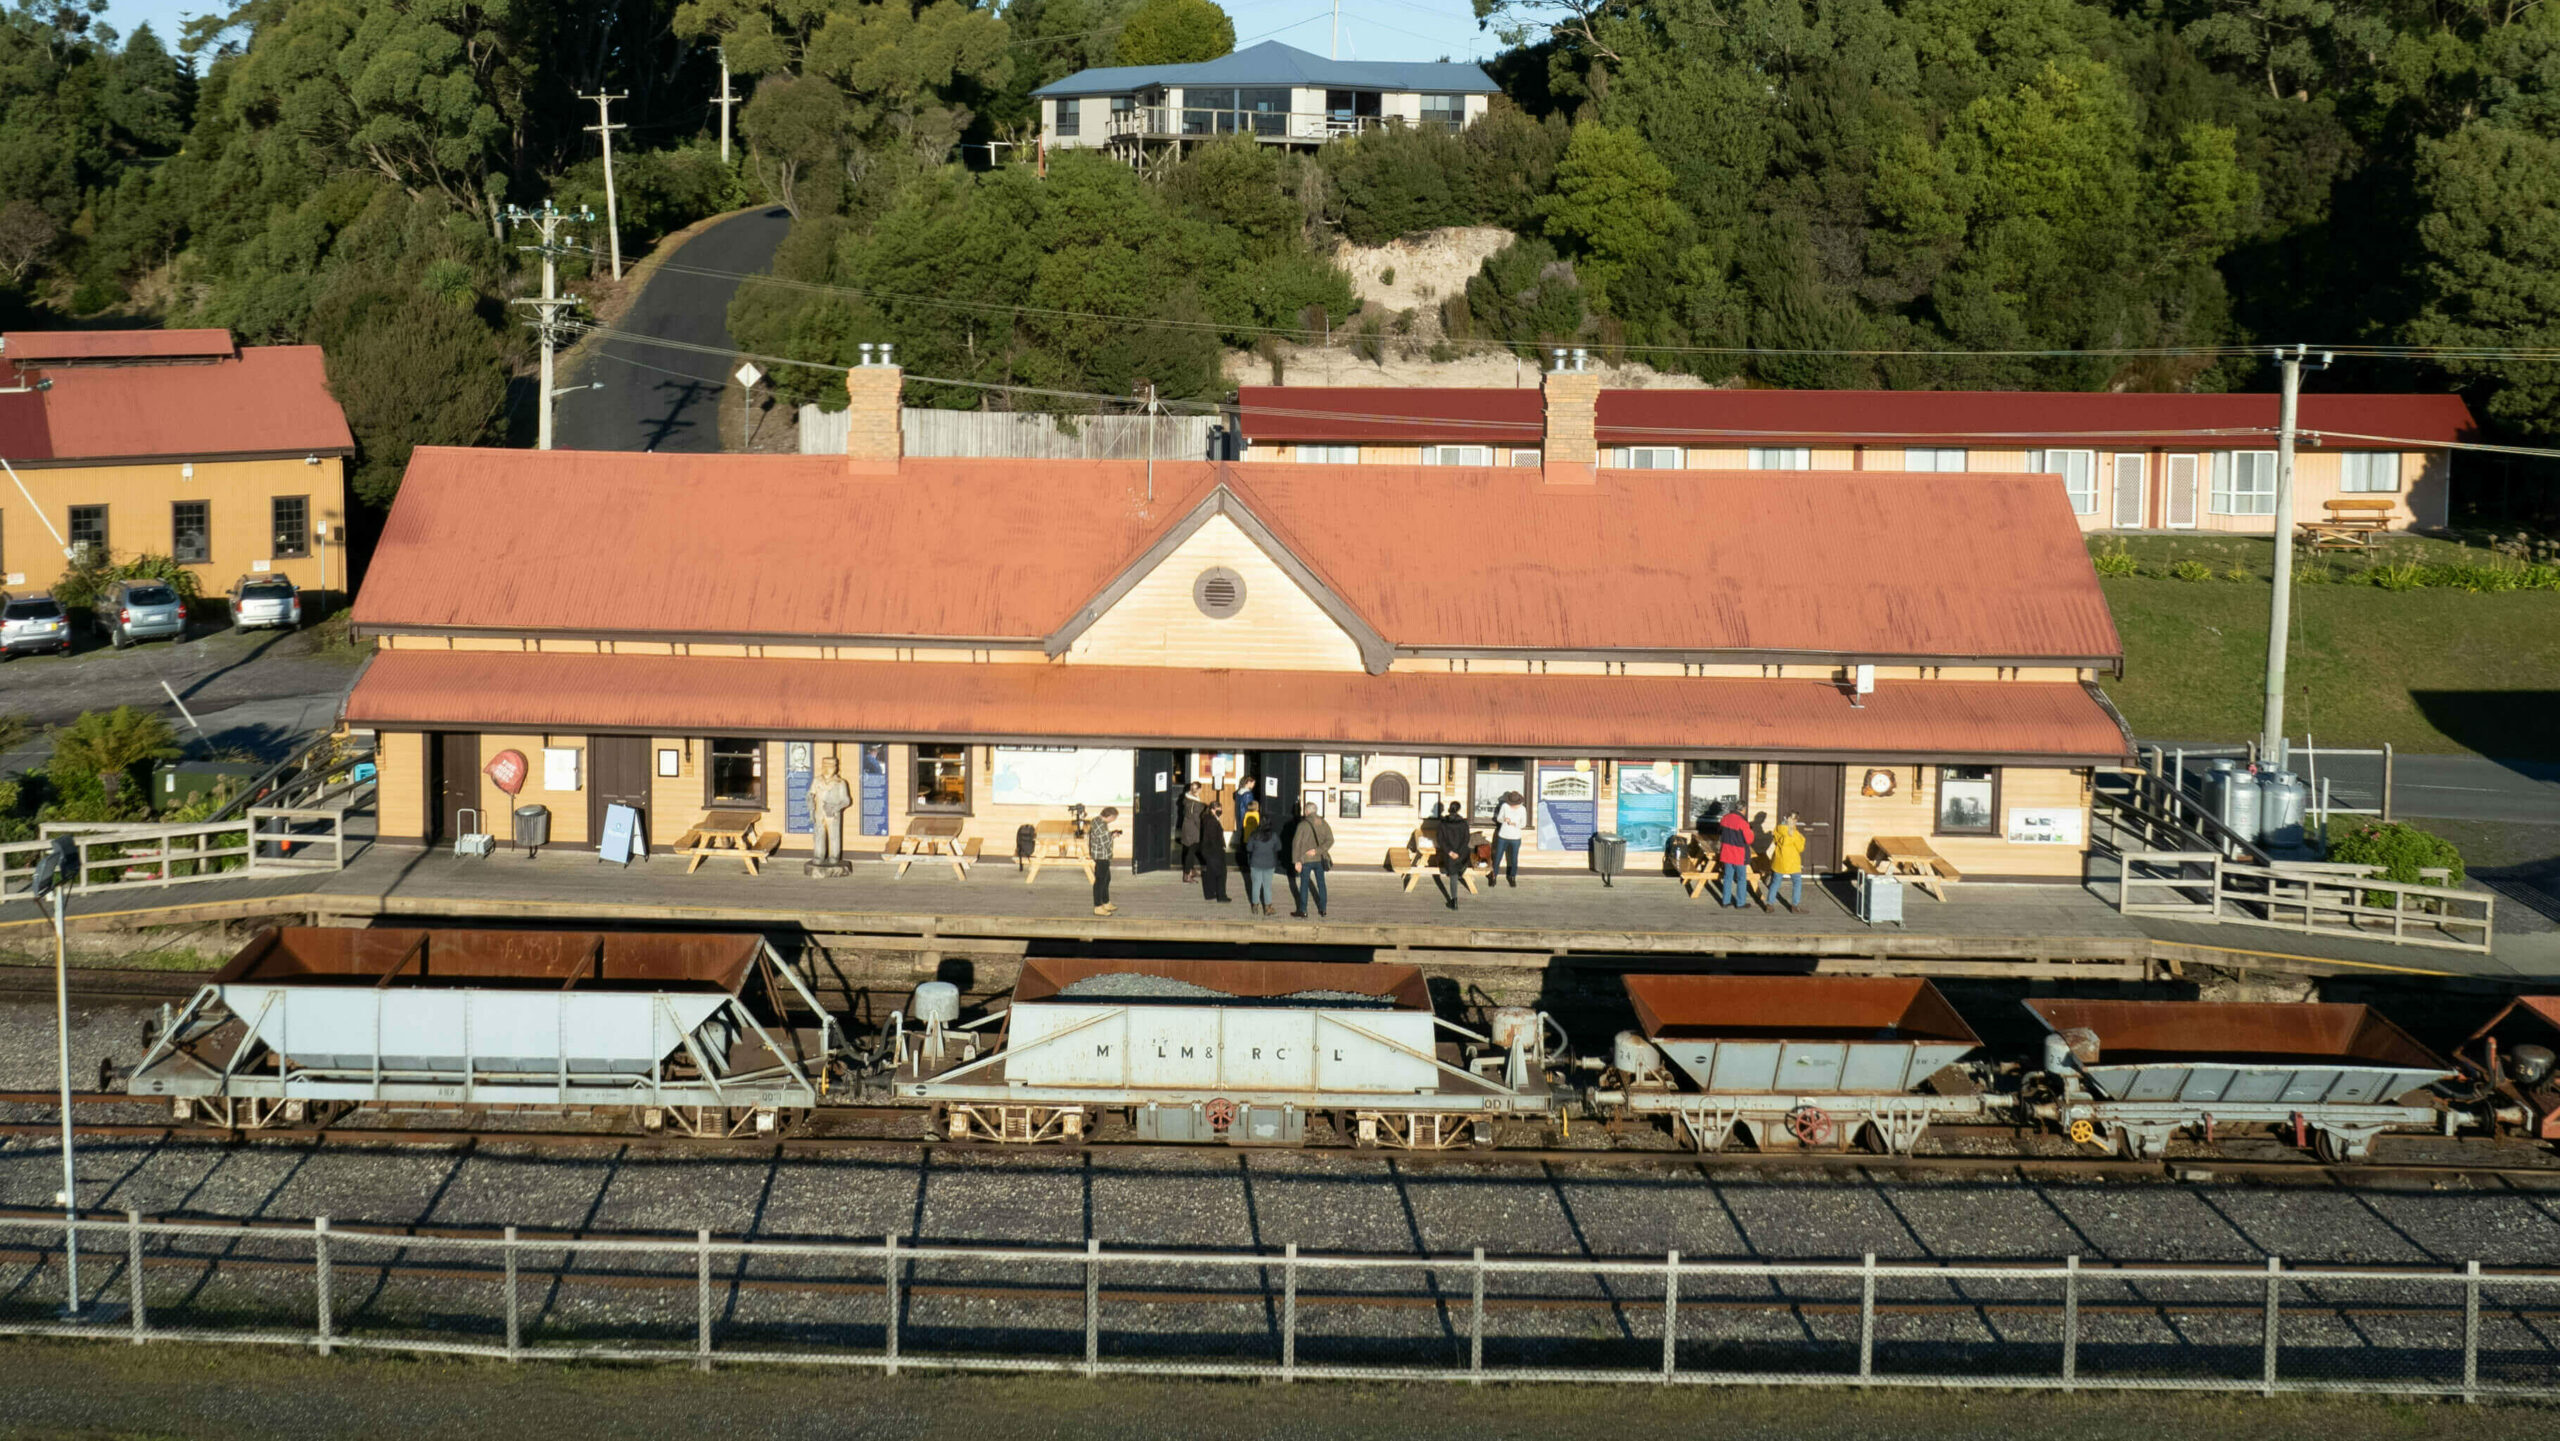 A drone image of Regatta Point Station, now a heritage listed cream coloured wooden building with red tin roof. People mill about on the platform while four open ballust wagons sit alongside the platform.